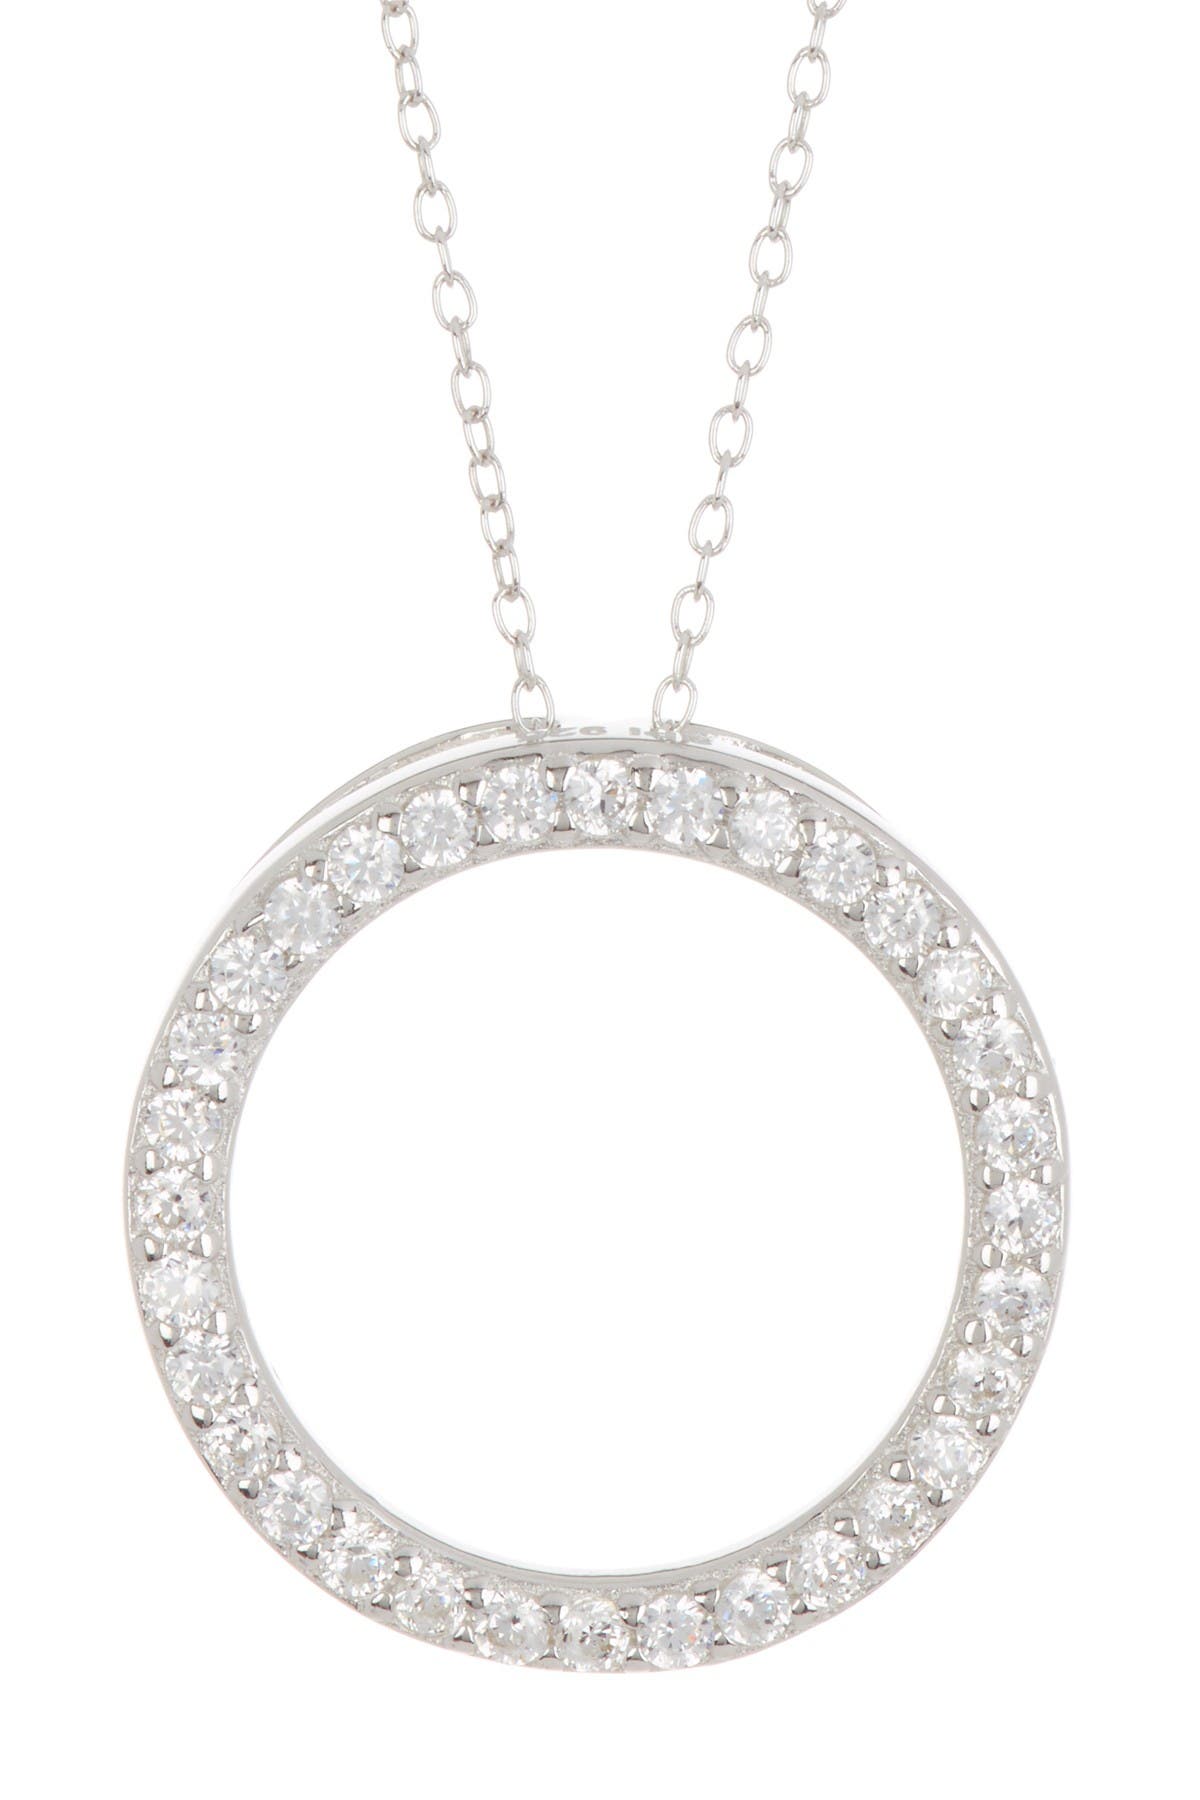 Adornia Sterling Silver Cz Open Ring Necklace